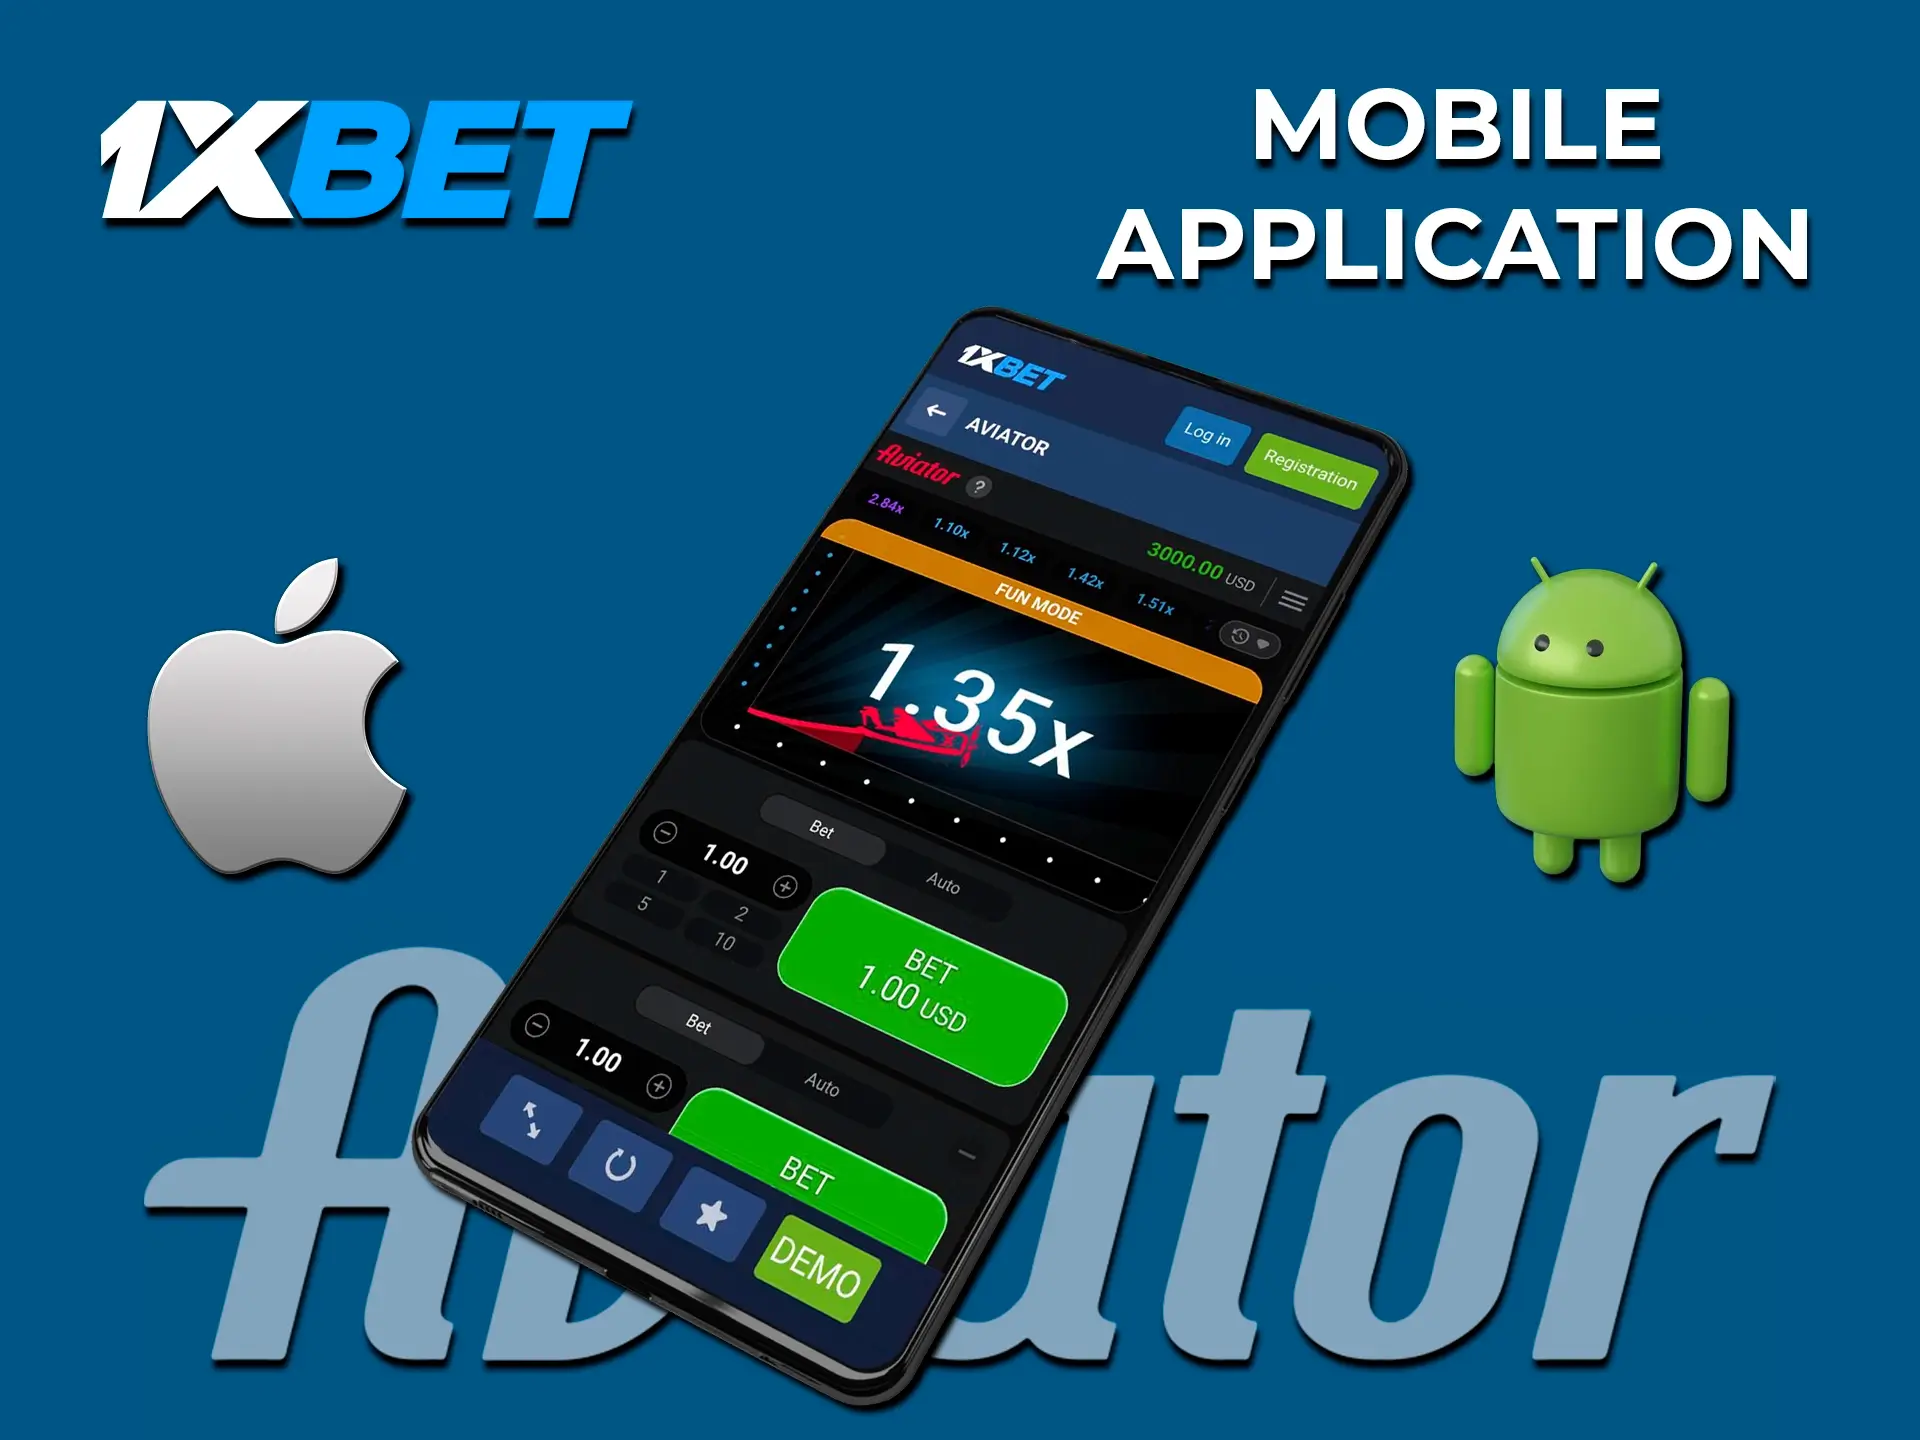 The 1xBet app shows excellent performance and high quality graphics when playing Aviator.